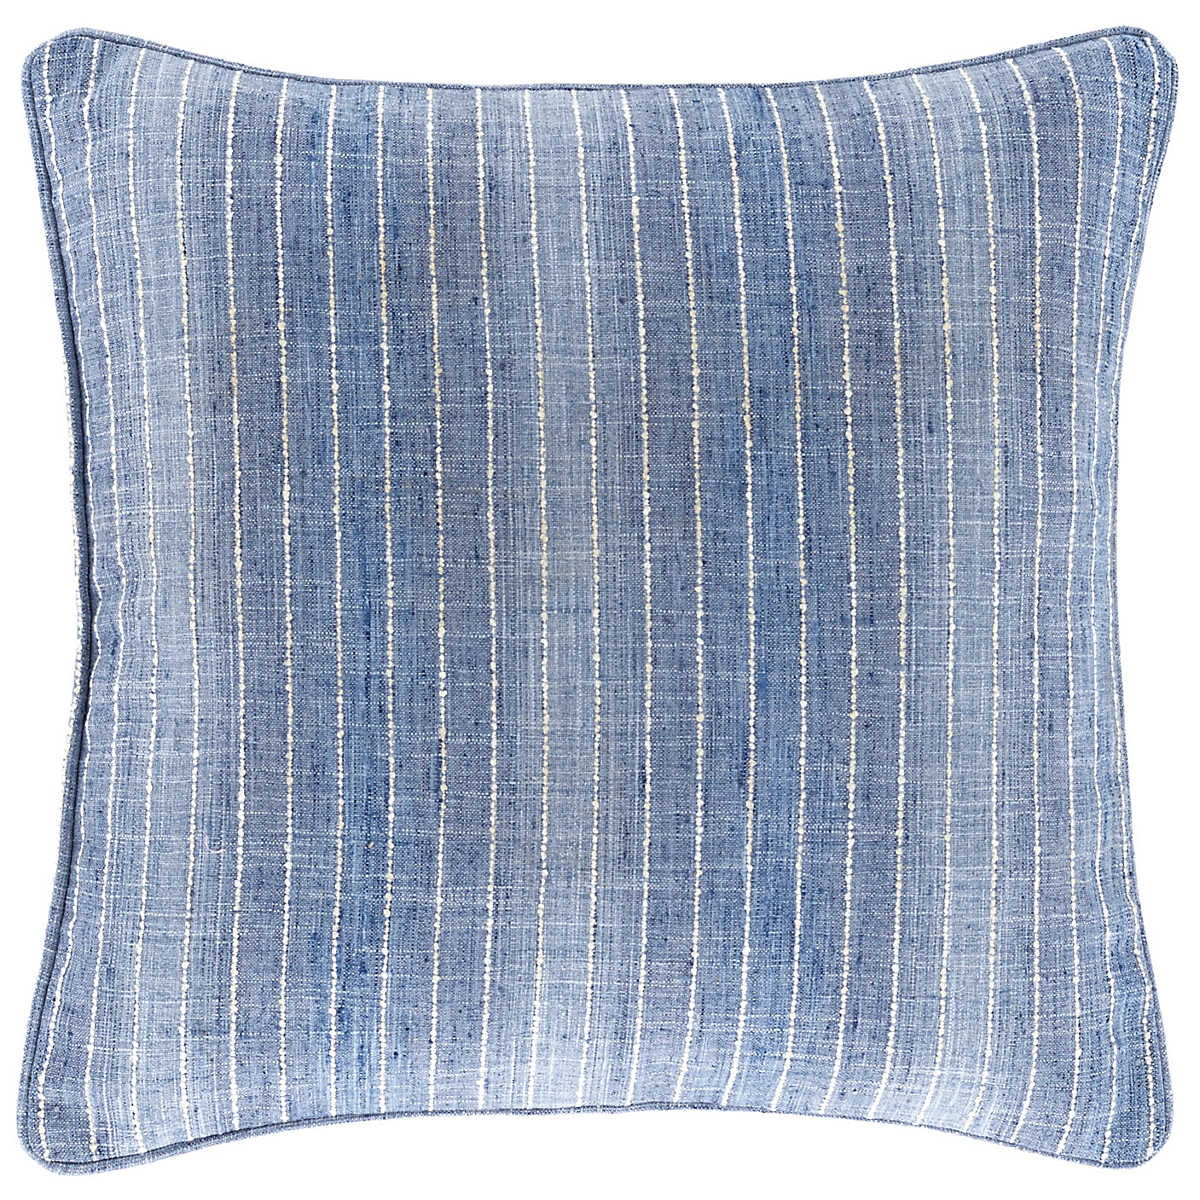 Phoenix French Blue Indoor/Outdoor Pillow with Insert. Front view.